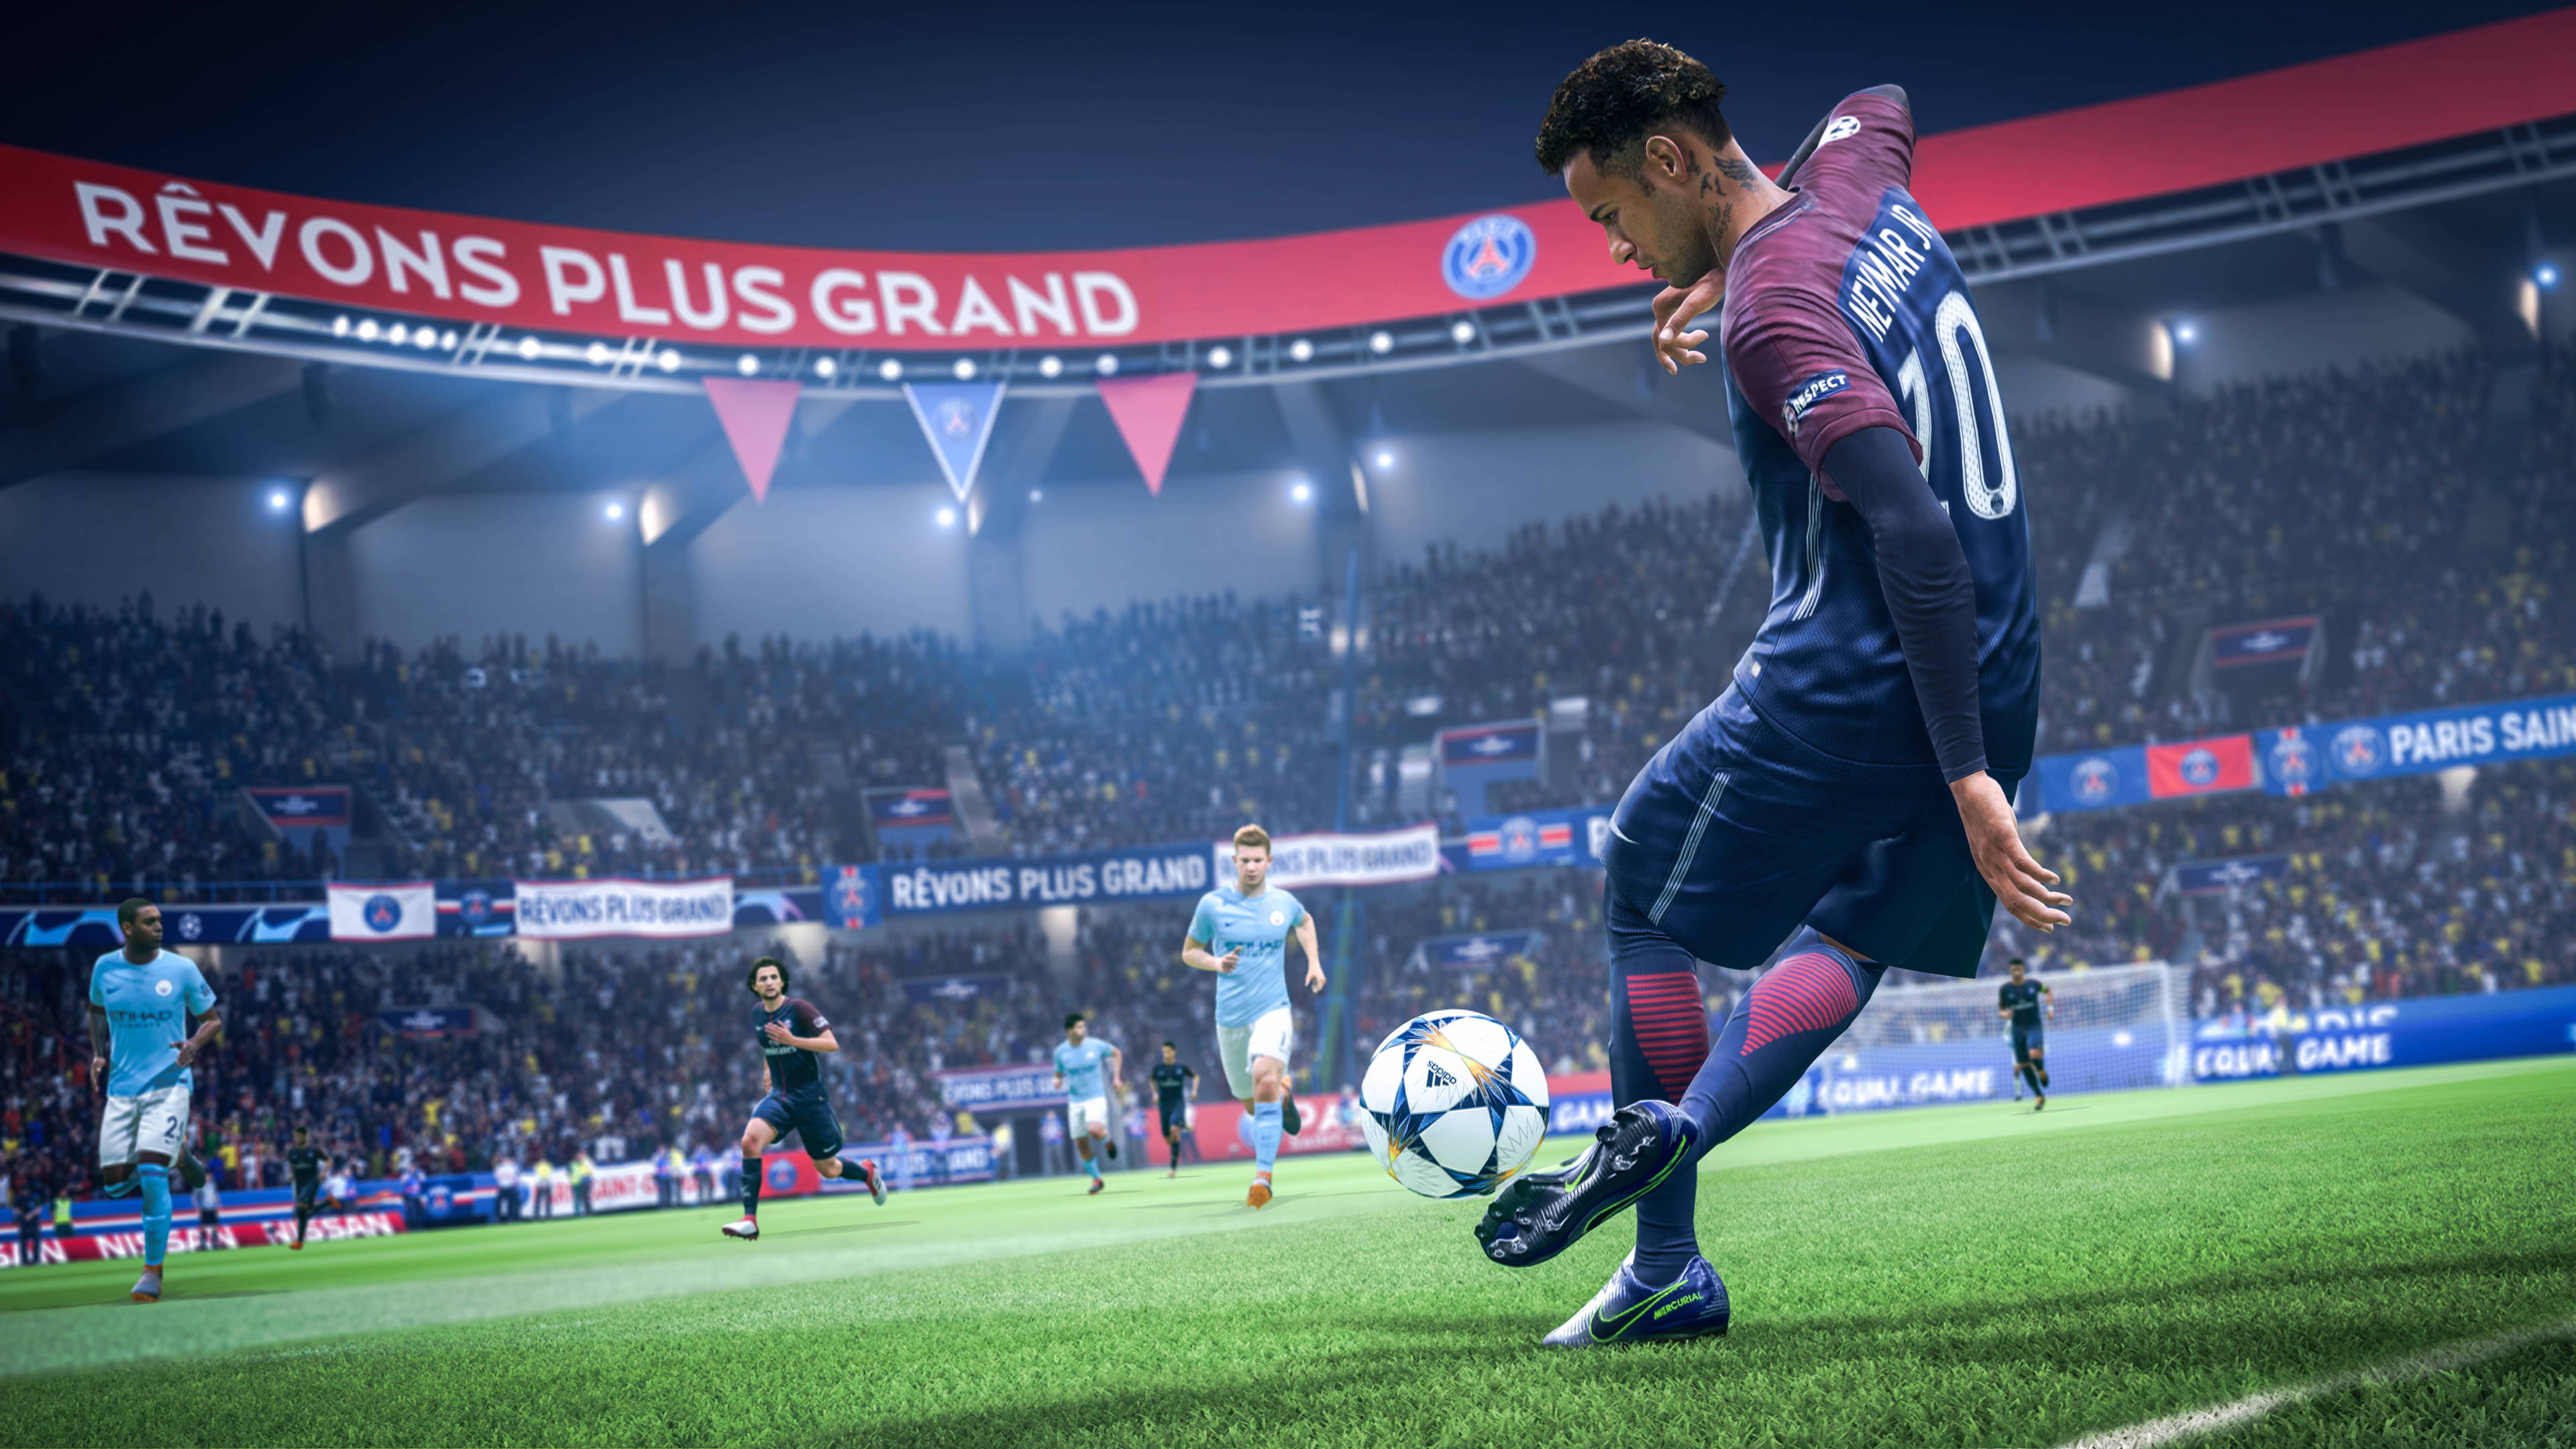 Video Game FIFA 19 HD Wallpaper | Background Image